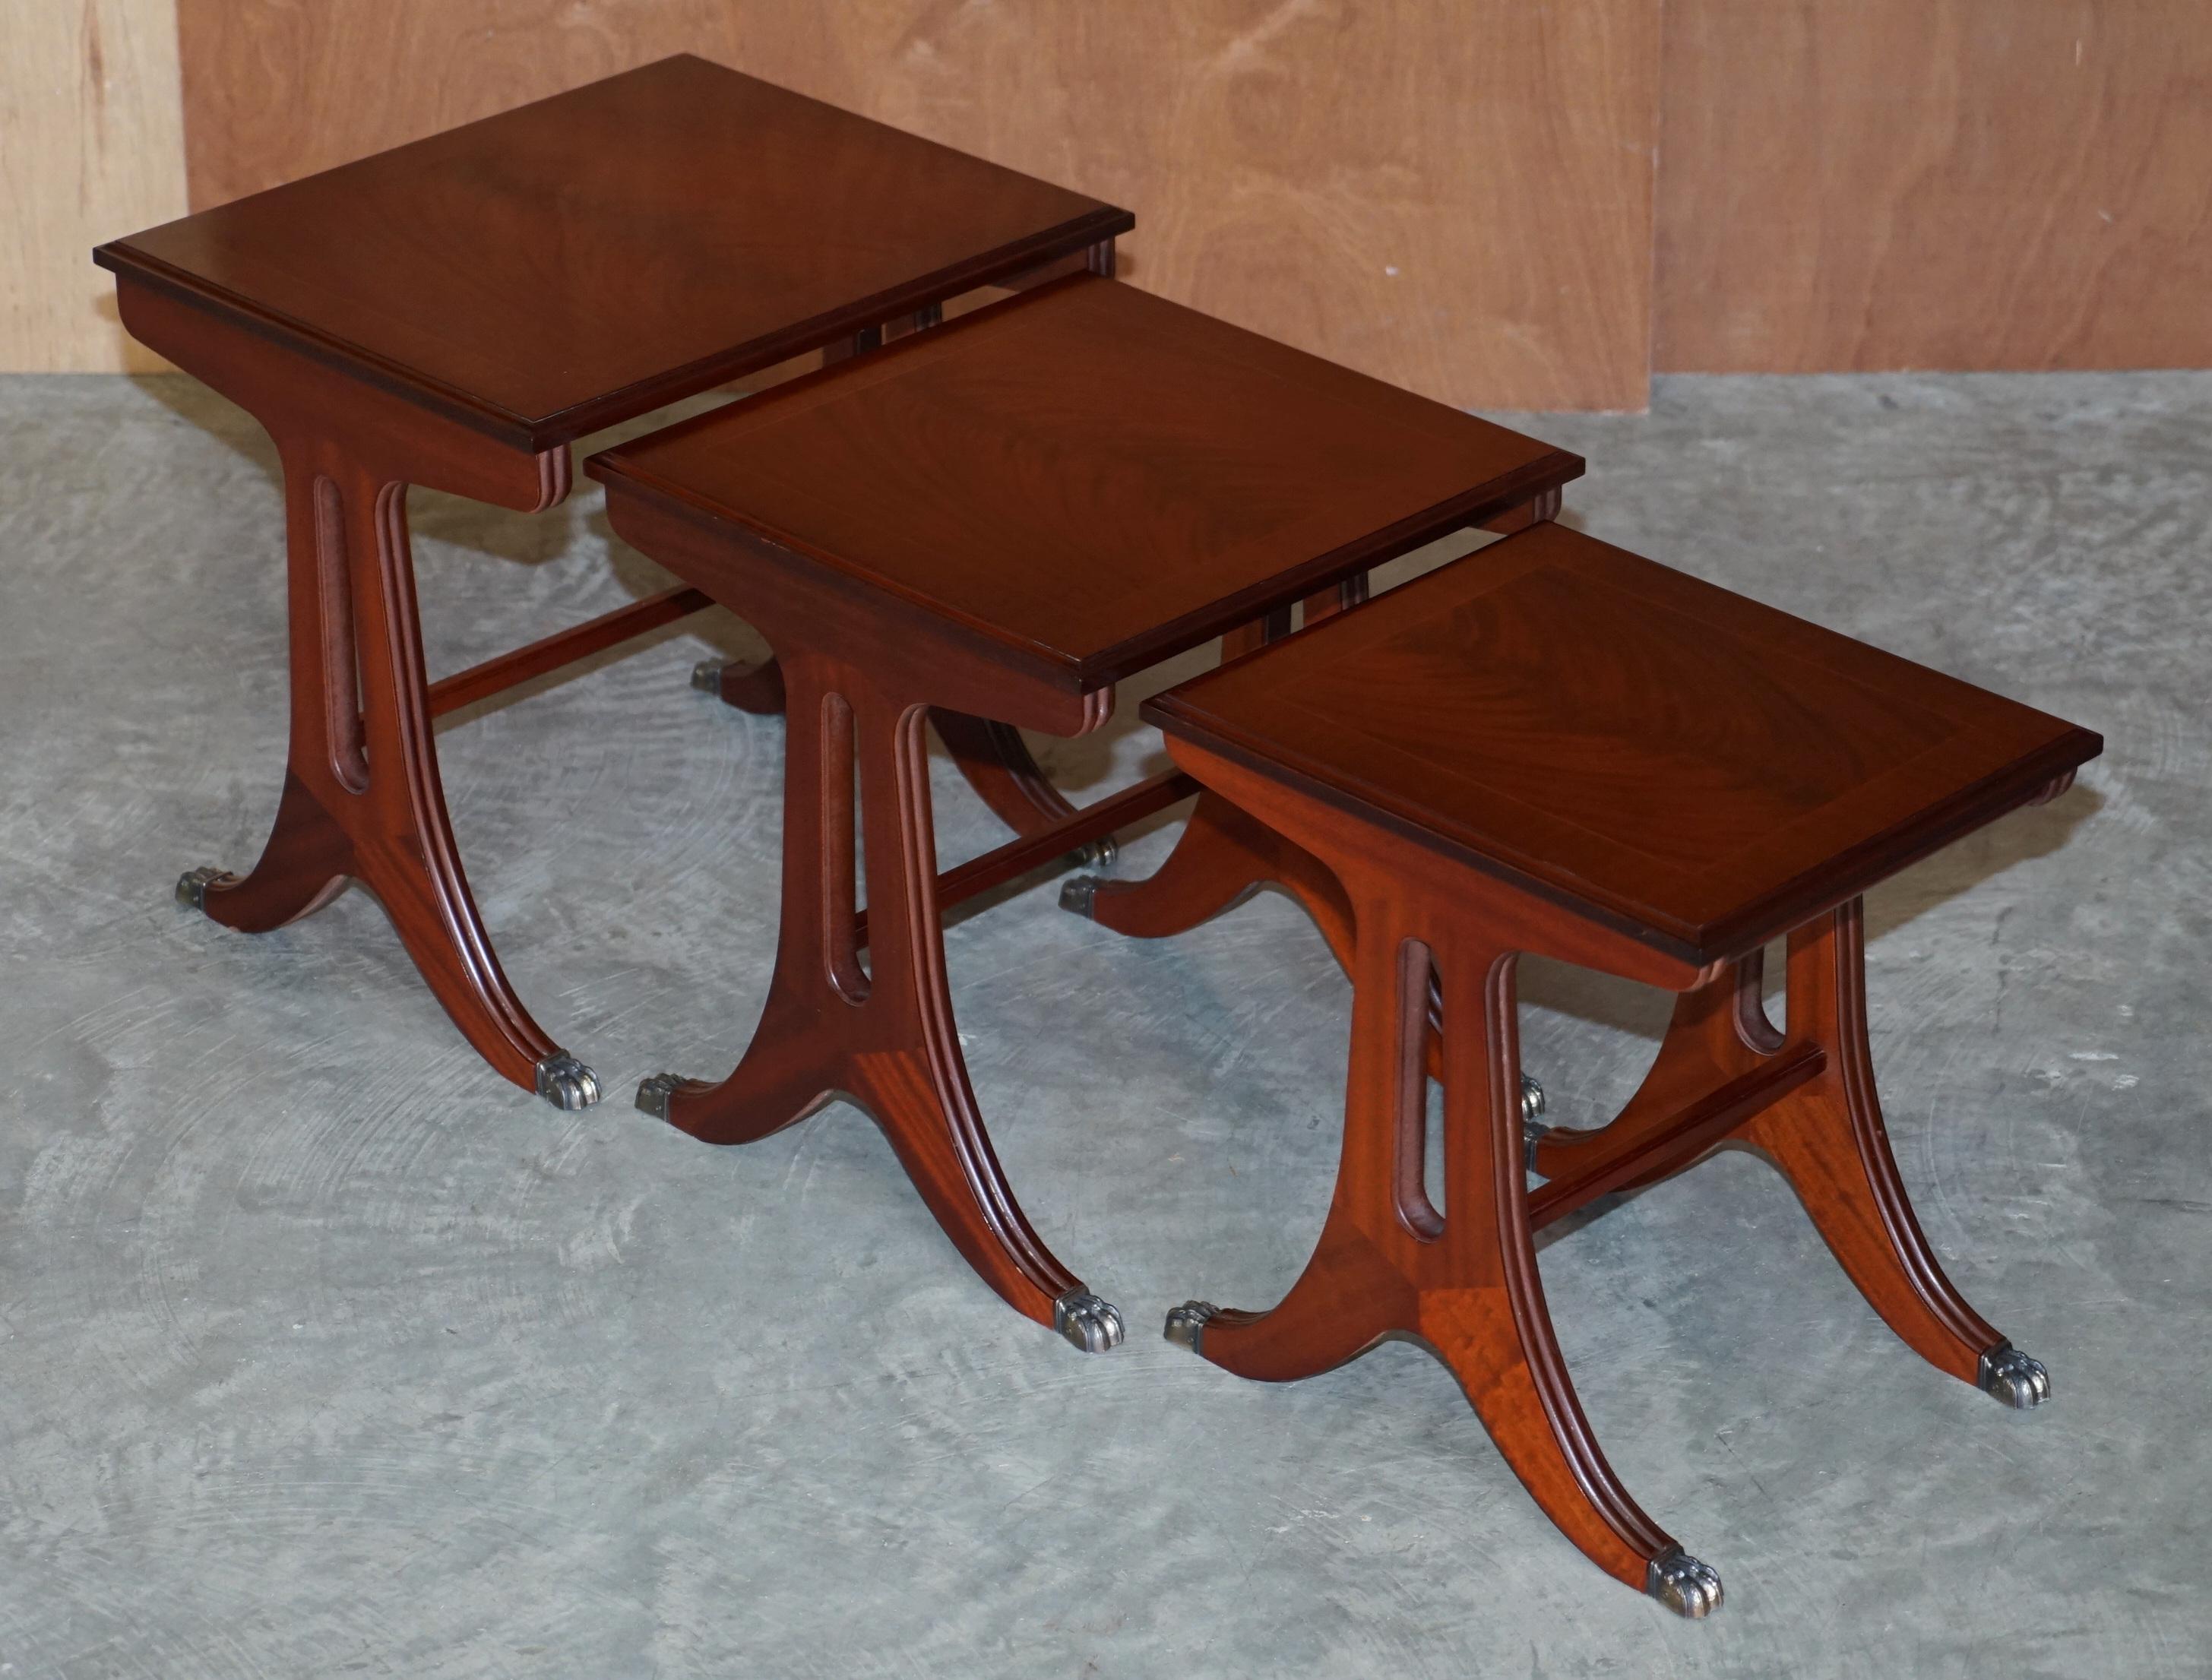 We are delighted to offer for sale this lovely nest of three tables which have flamed mahogany tops and lions hairy paw brass feet

A very good looking and well made nest, the timber patina to the top is very nice, the feet offer a touch of style